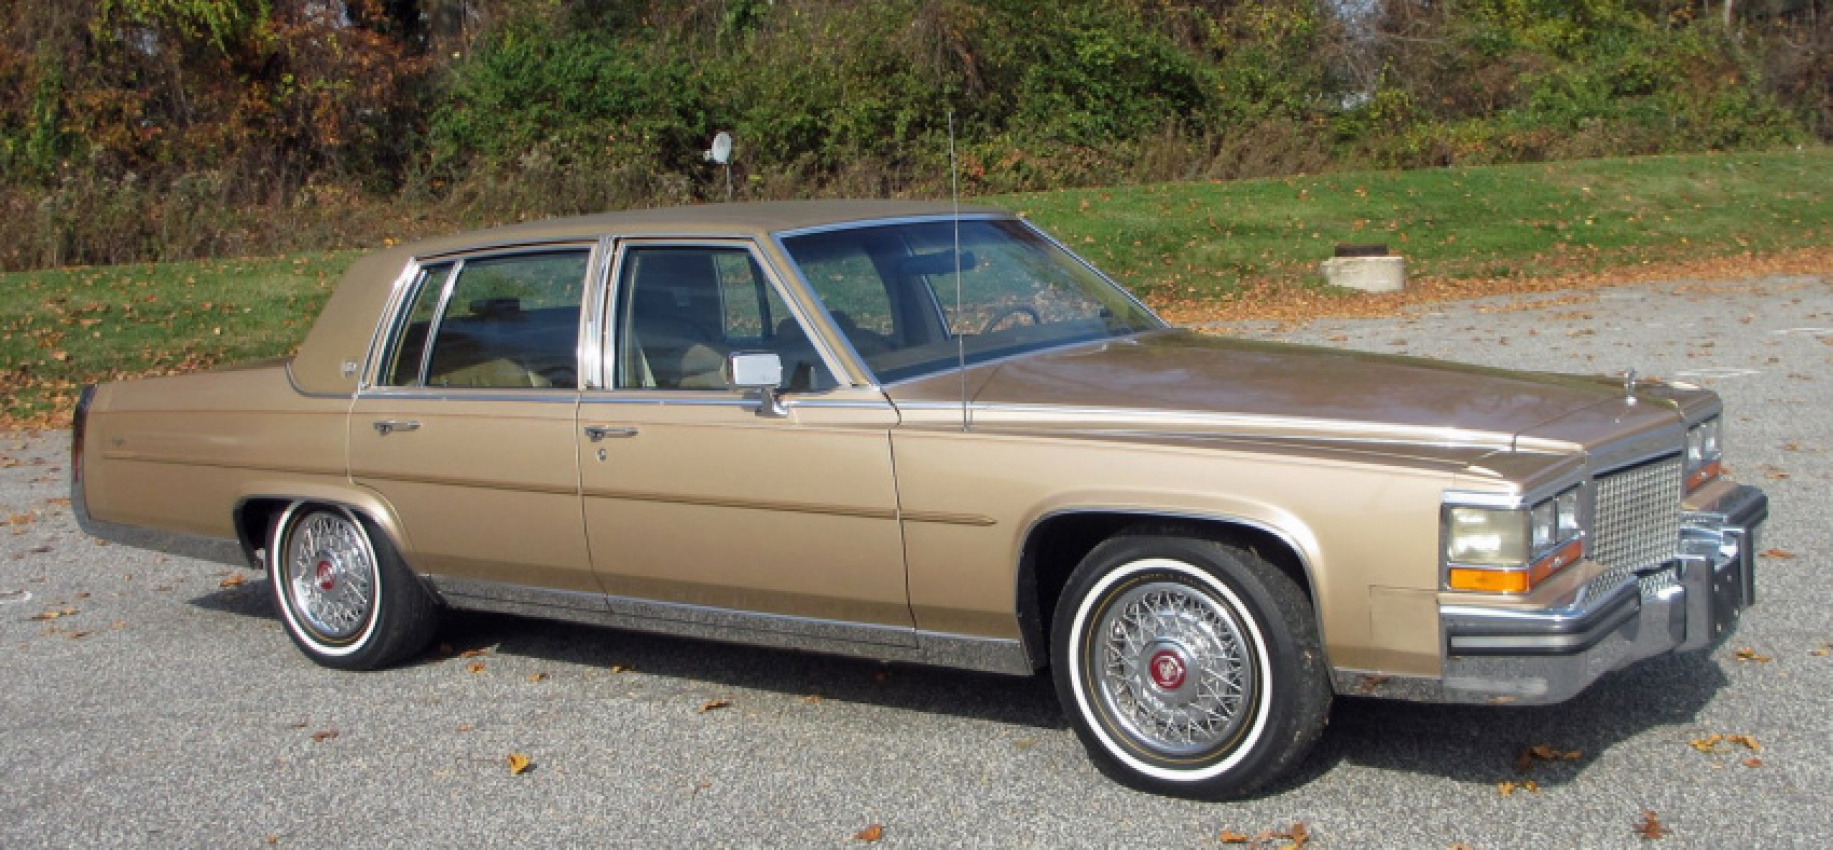 autos, cadillac, cars, classic cars, 1980s, year in review, cadillac brougham 1987